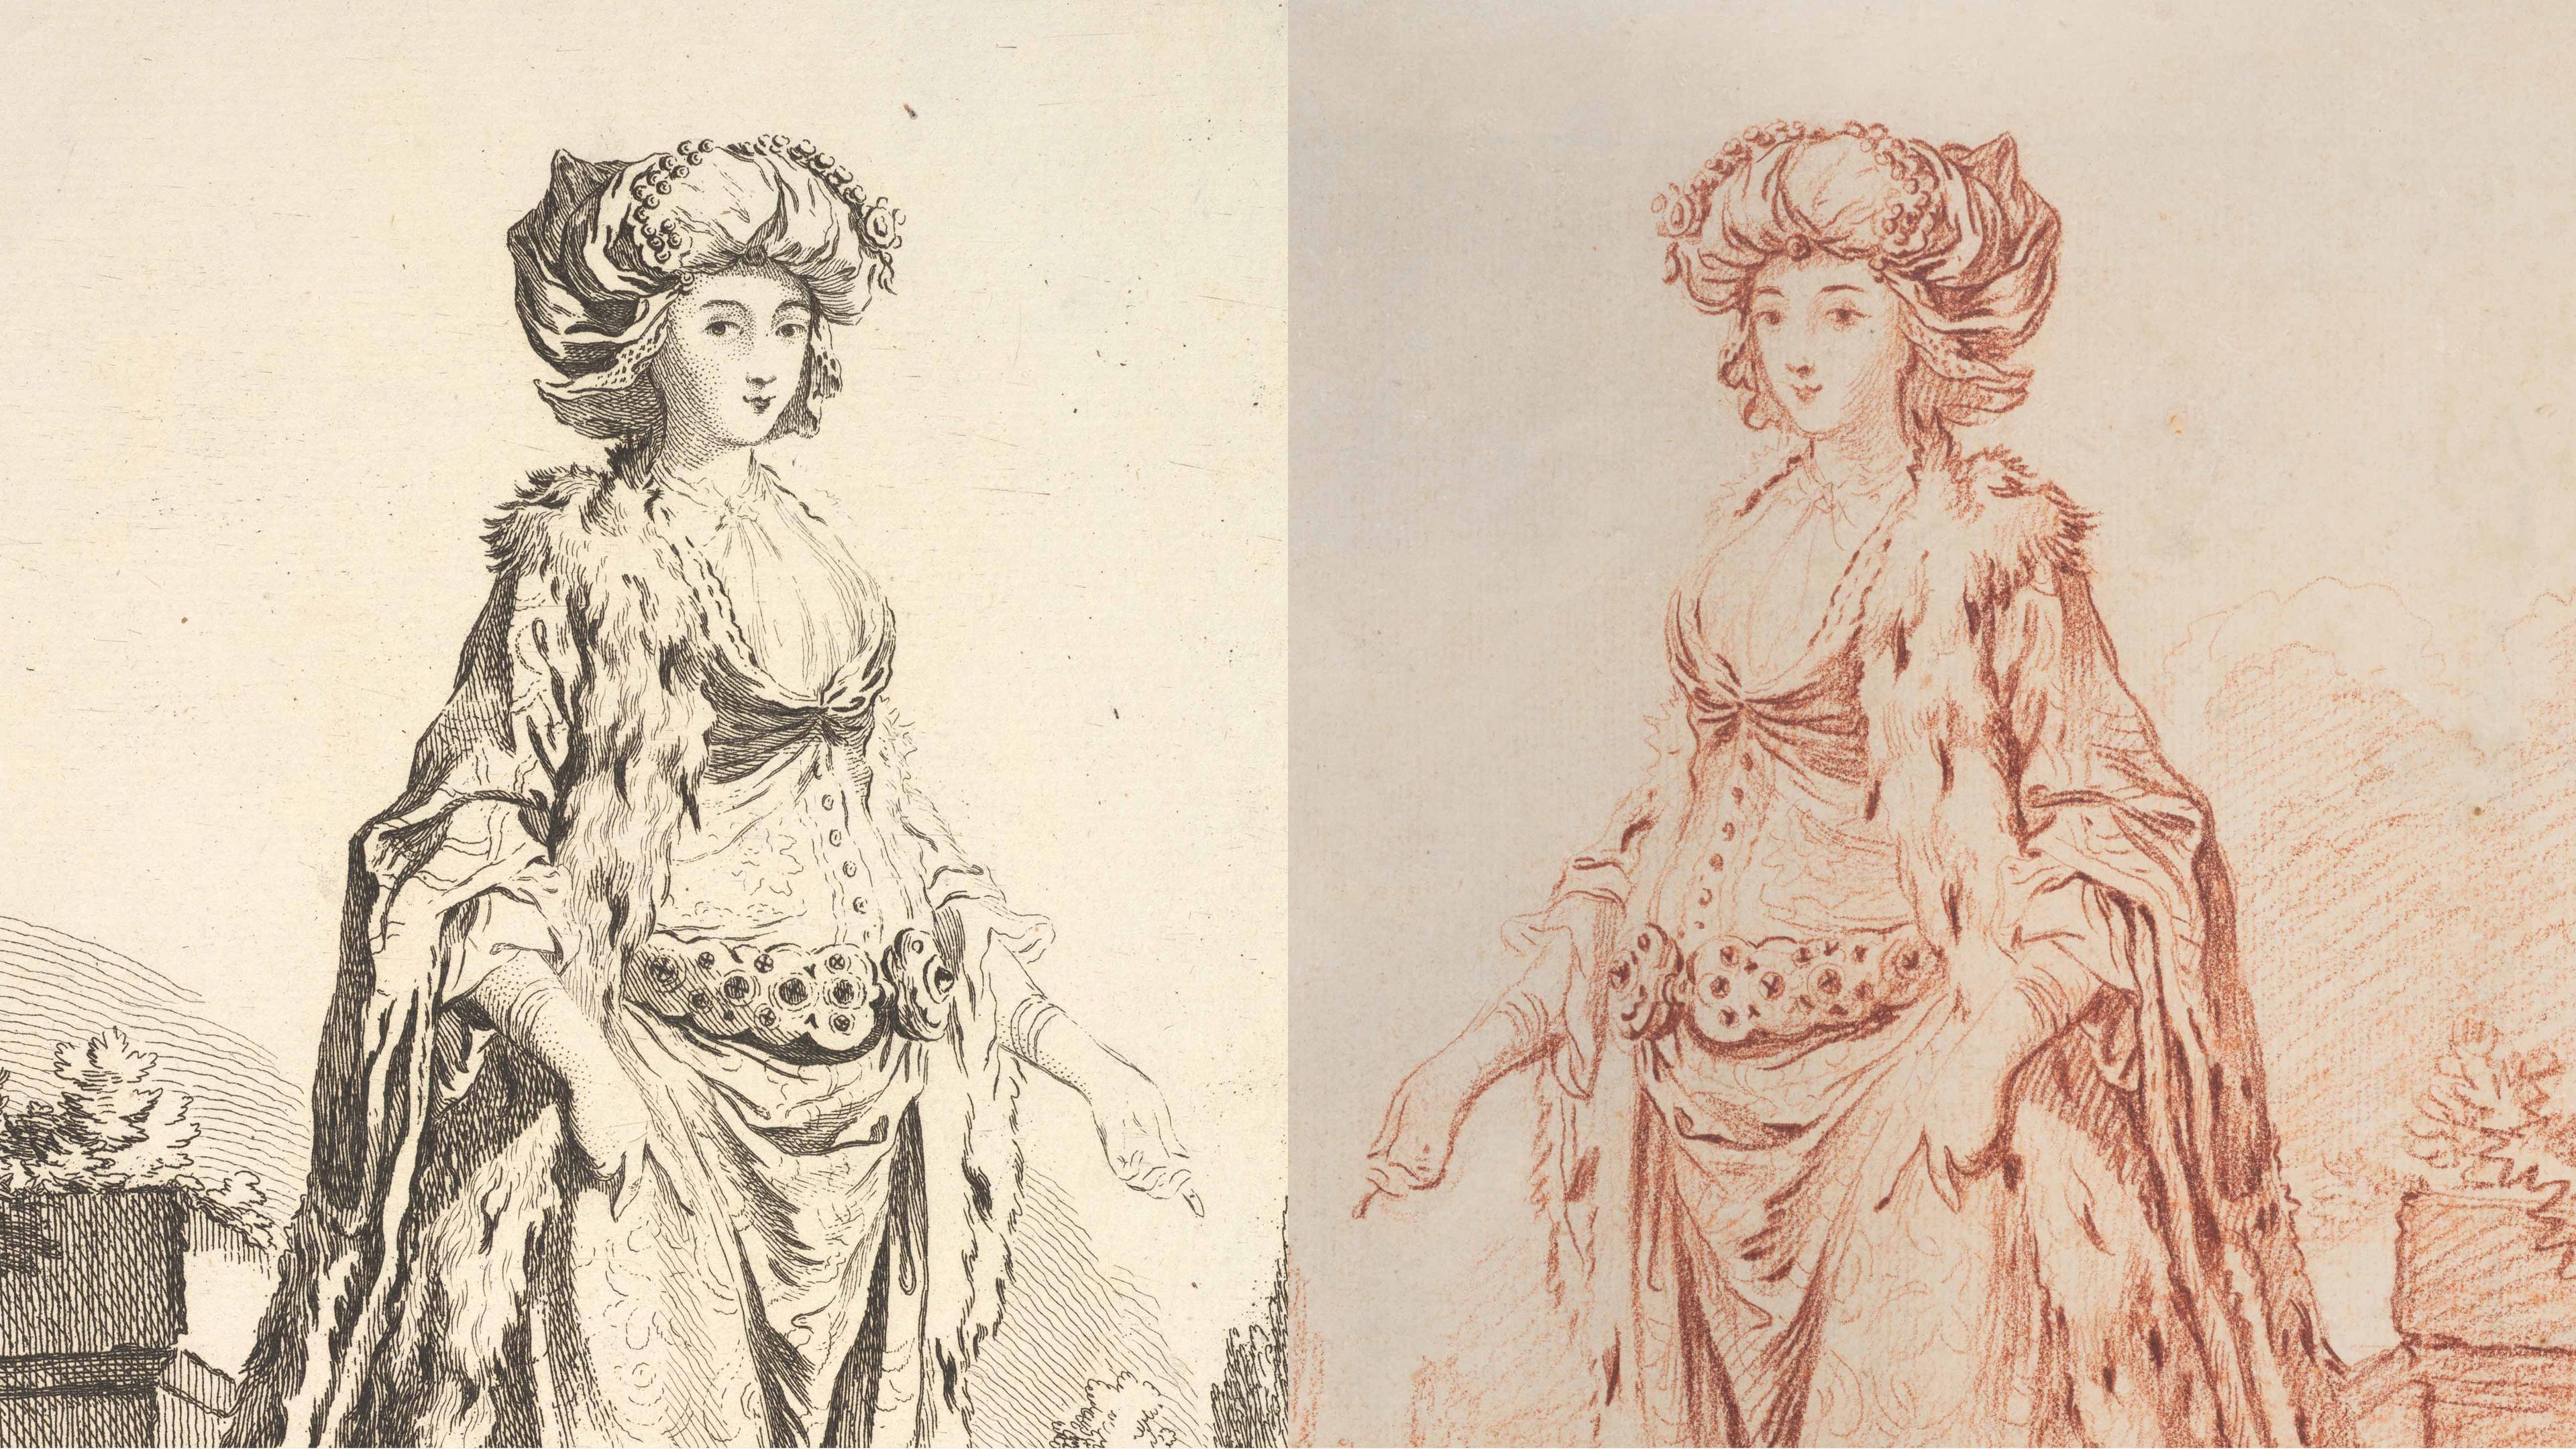 Composite image of two identical drawings of a woman with a large hat and her hands holding her billowing dress